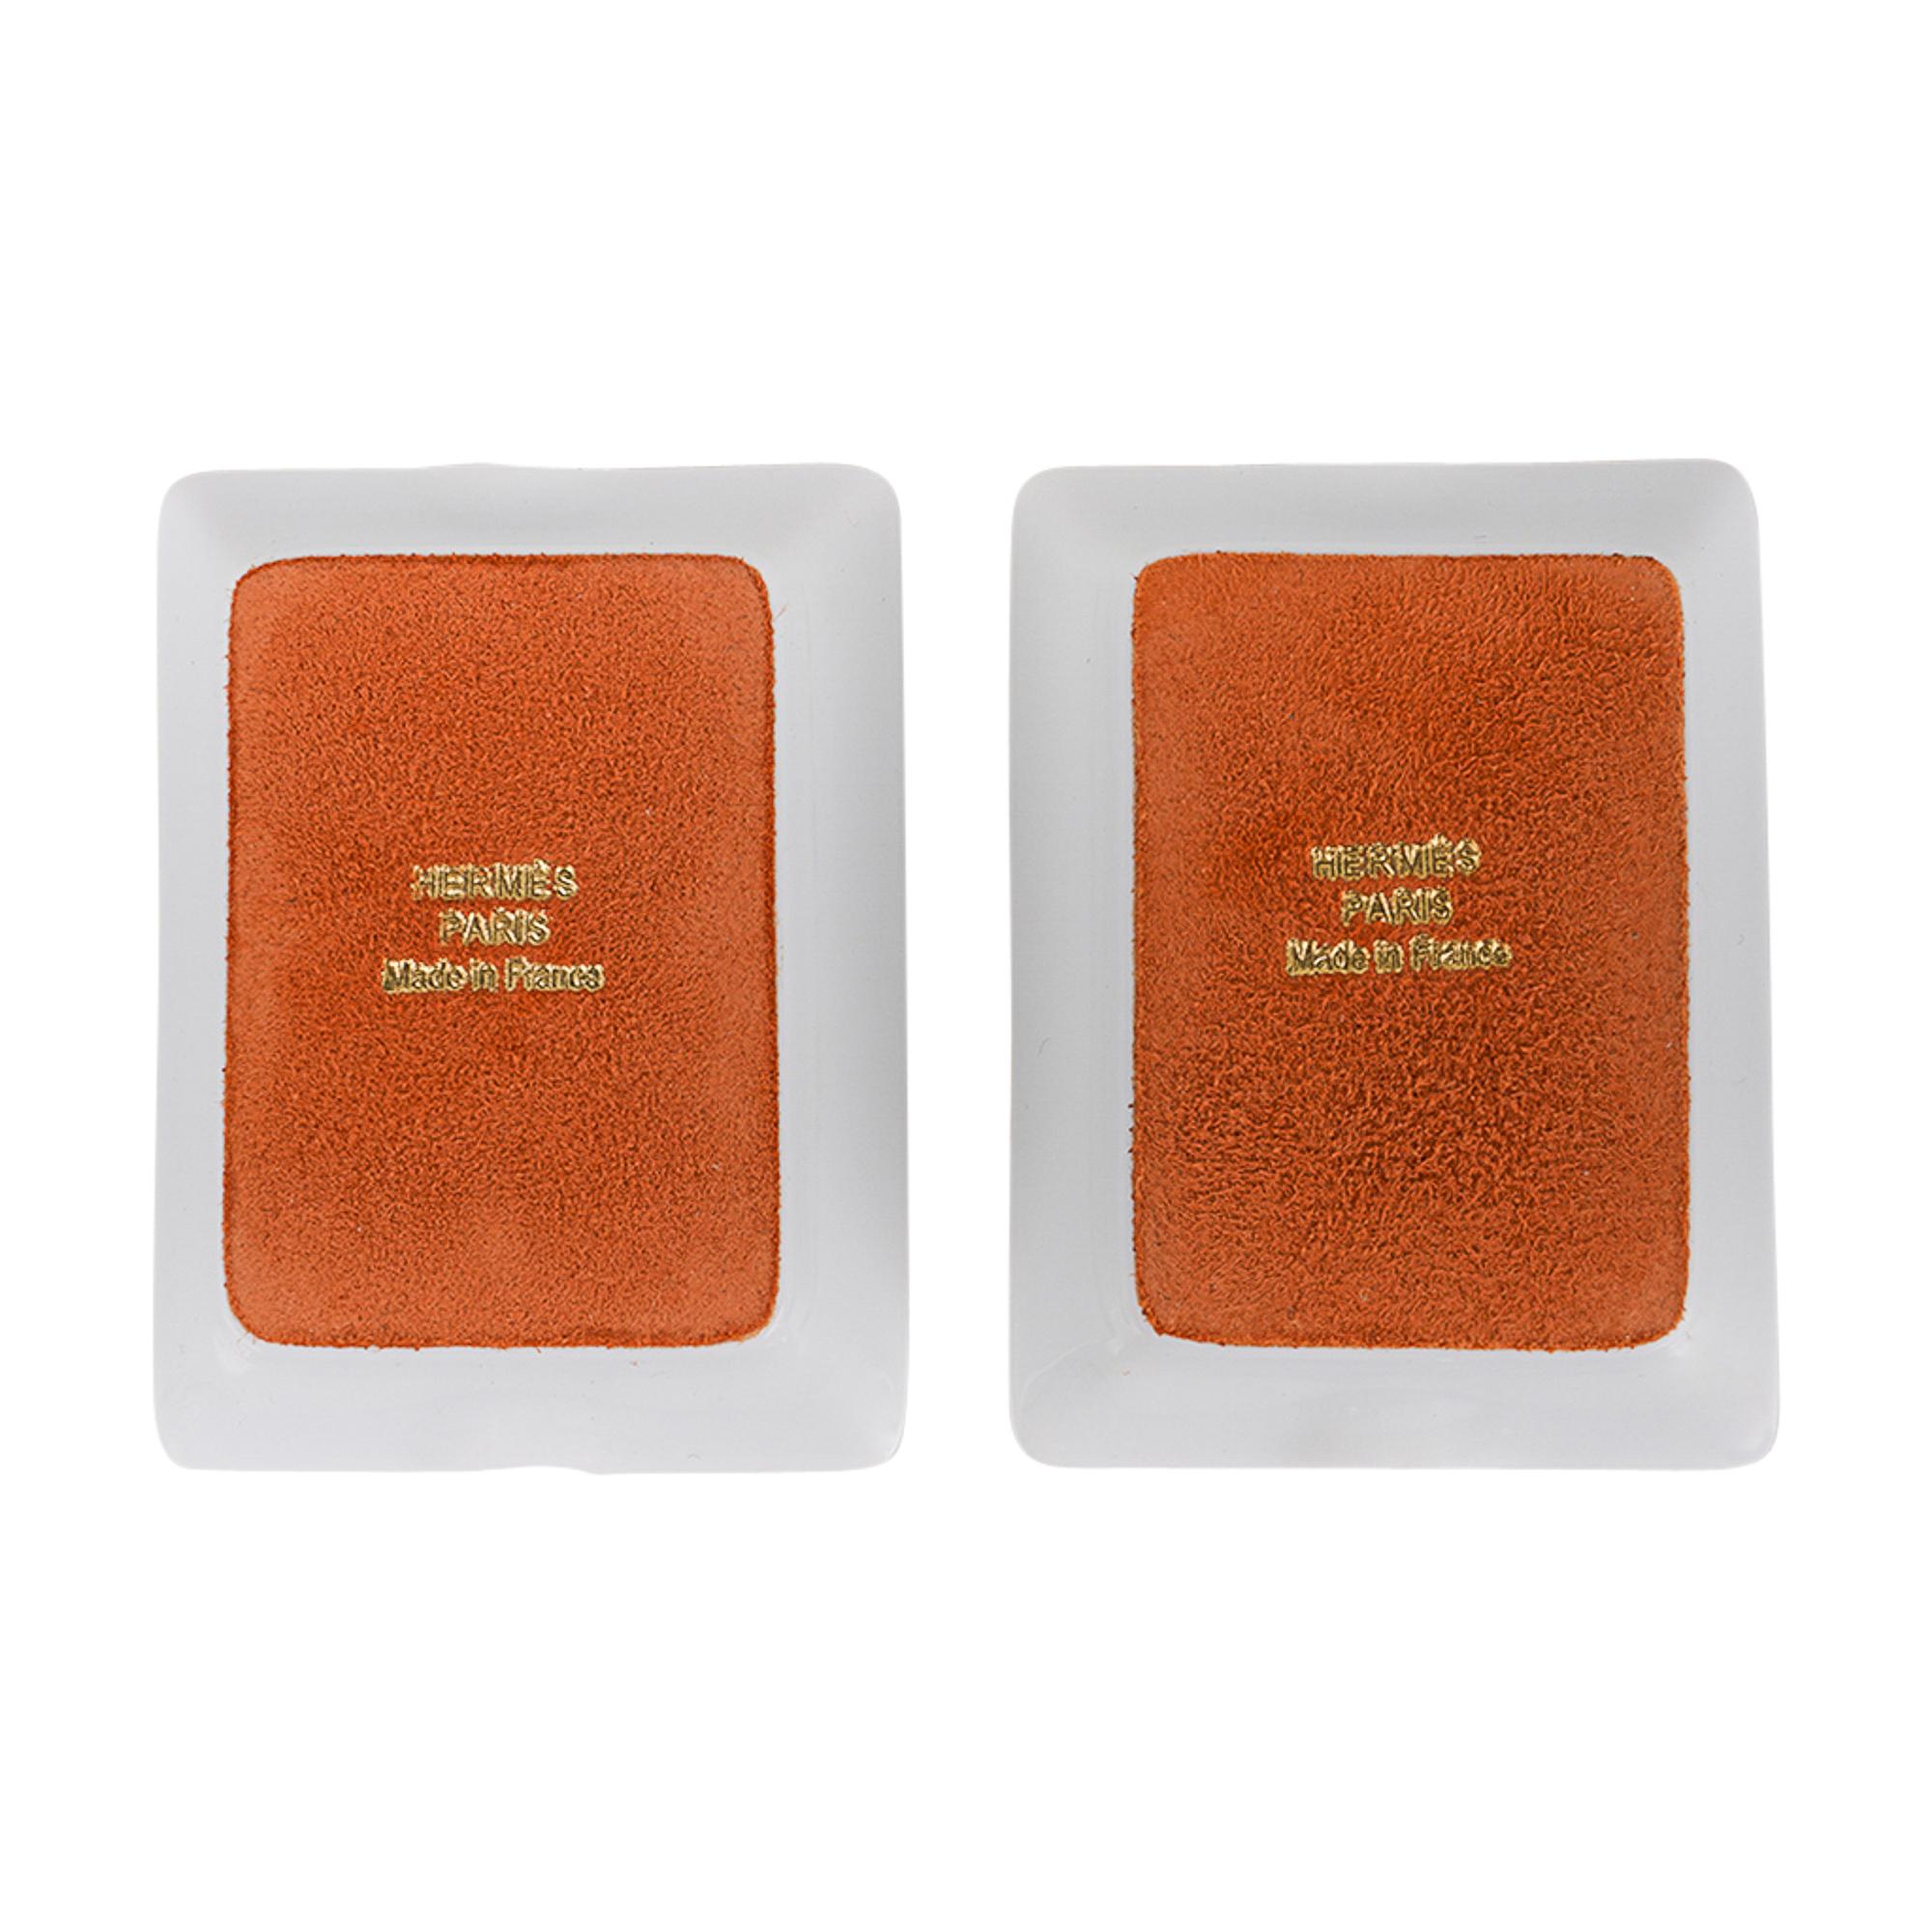 Hermes Manufacture des Boucleries Mini Ashtray Set of Two Porcelain New w/Box For Sale 4